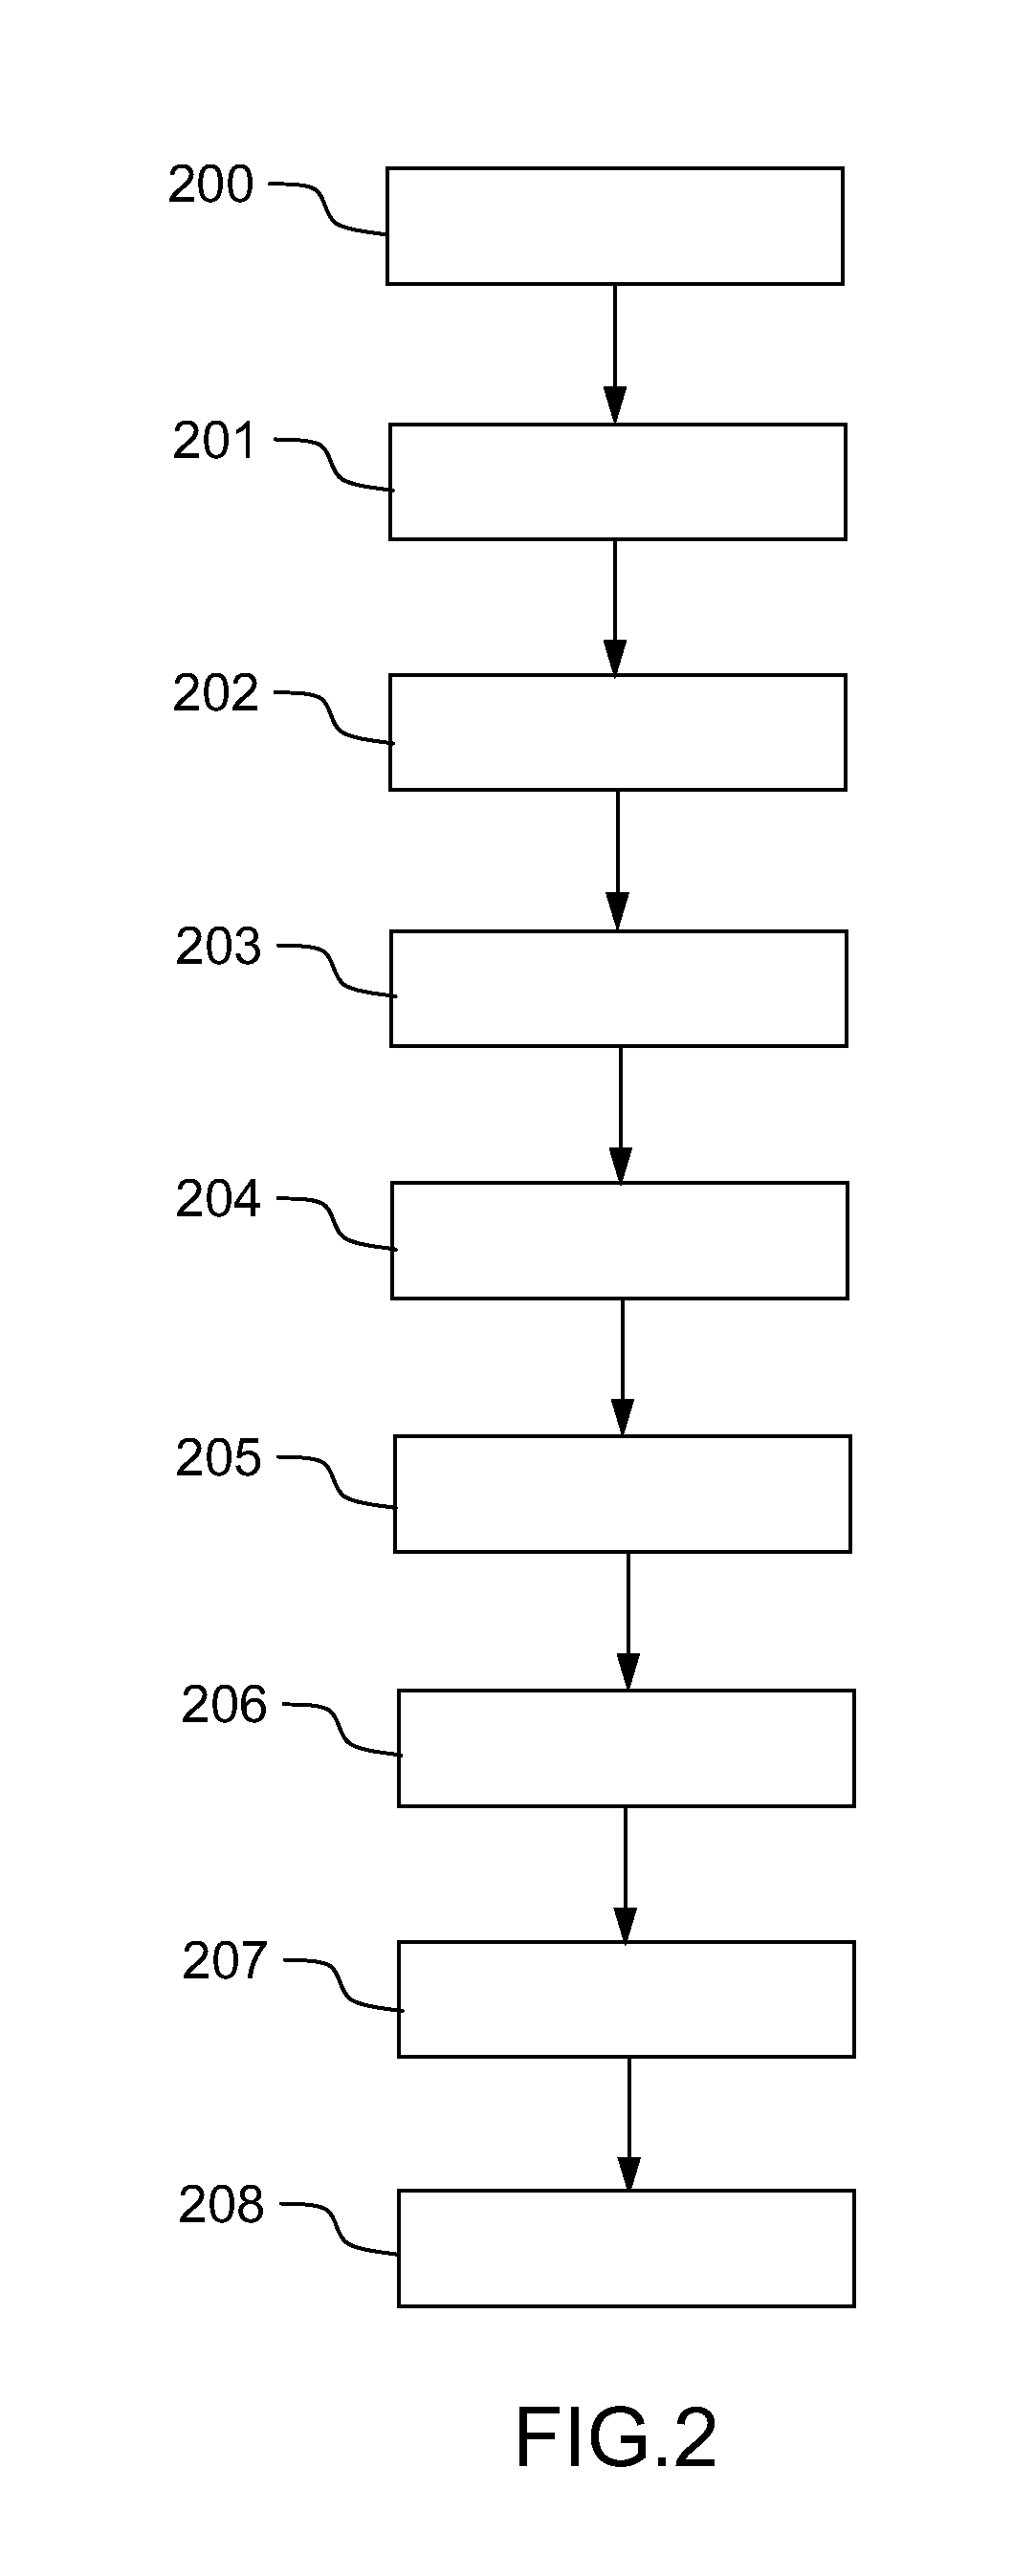 Process for Manufacturing a Ceramic Composite Based on Silicon Nitride and Beta-Eucryptite